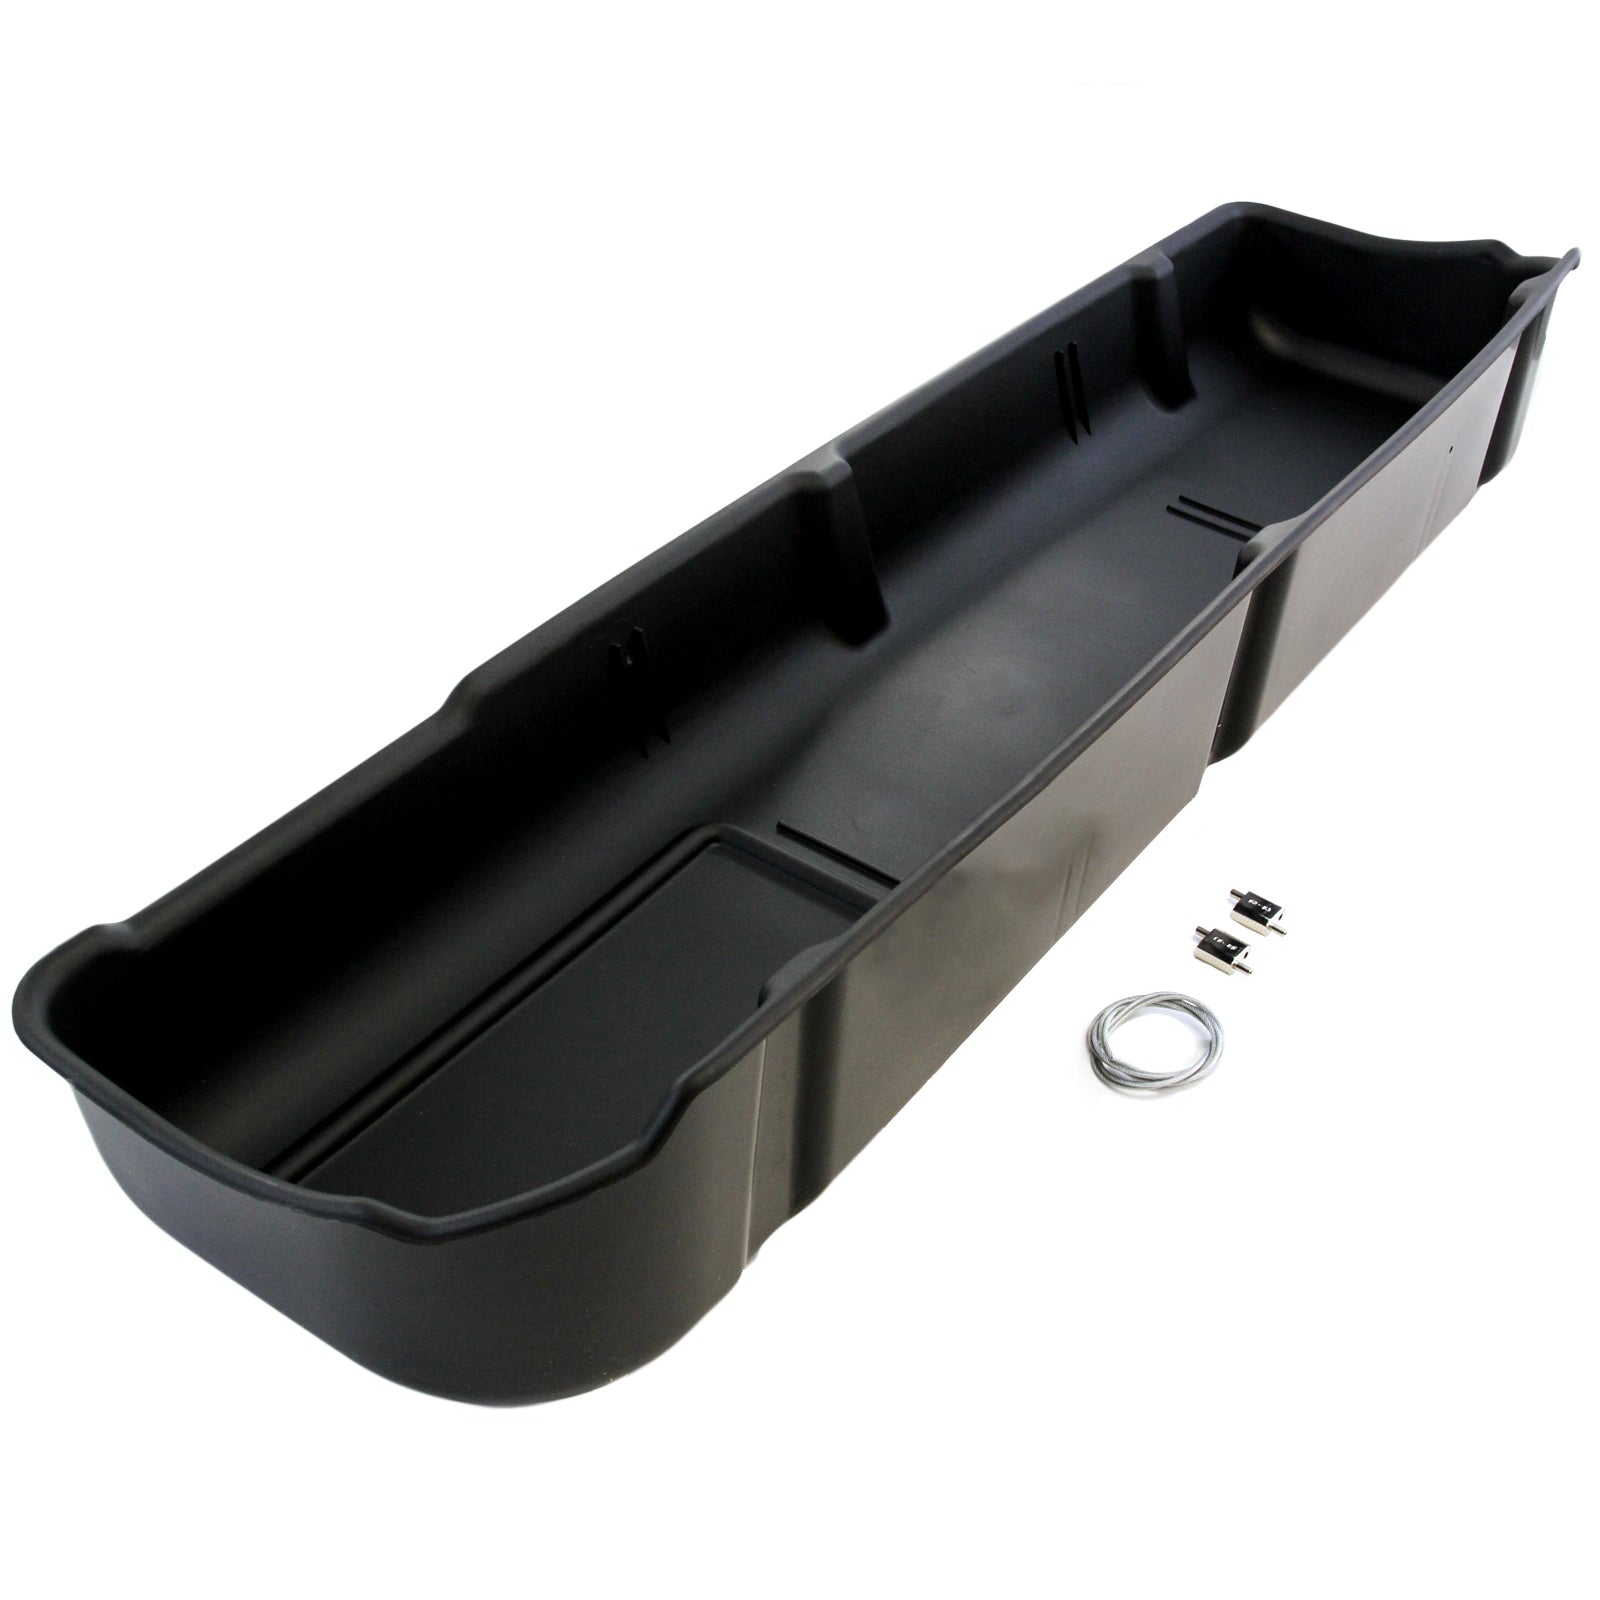 Red Hound Auto Under Seat Storage Box Compatible with F150 Ford F-150 SuperCrew Crew Cab 2009-2014 Underseat System (Only fits SuperCrew Cab, Will not fit Vehicles with OEM subwoofers)